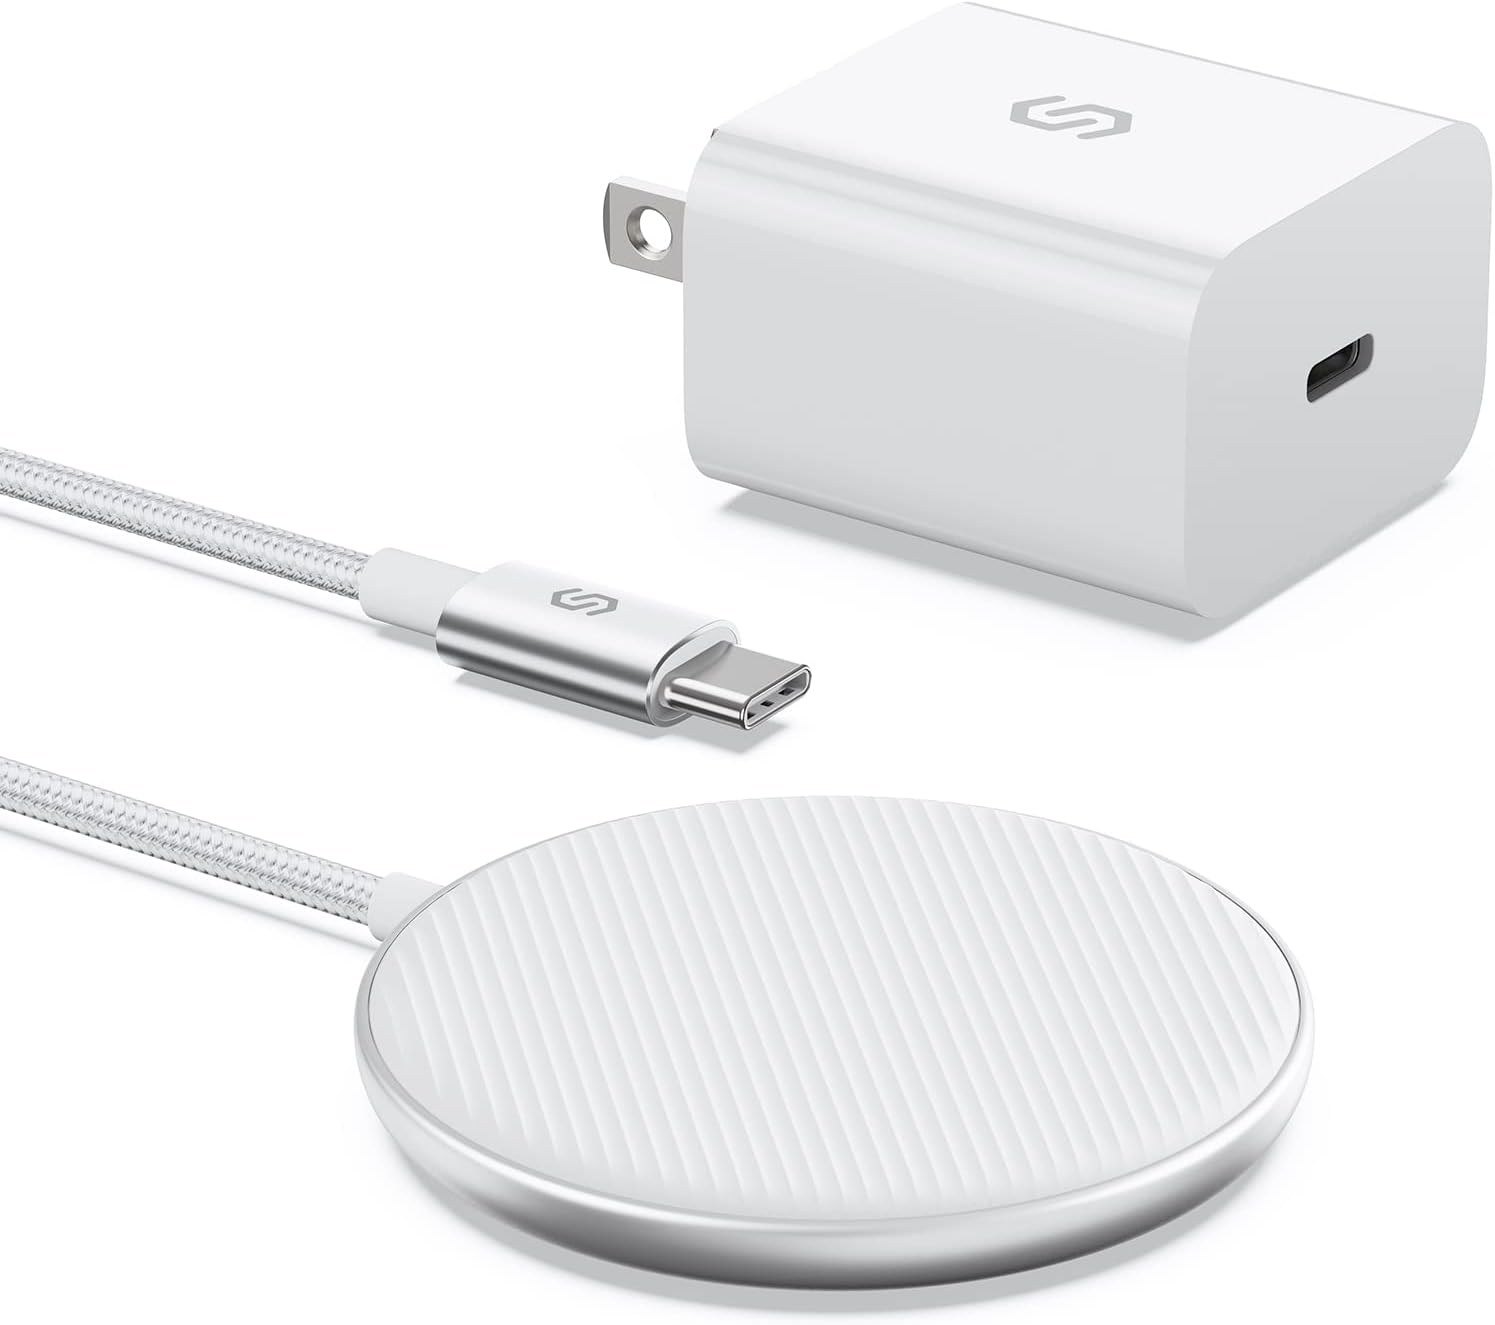 Review of Syncwire Magnetic Wireless Charger with 20W USB-C Wall Charger